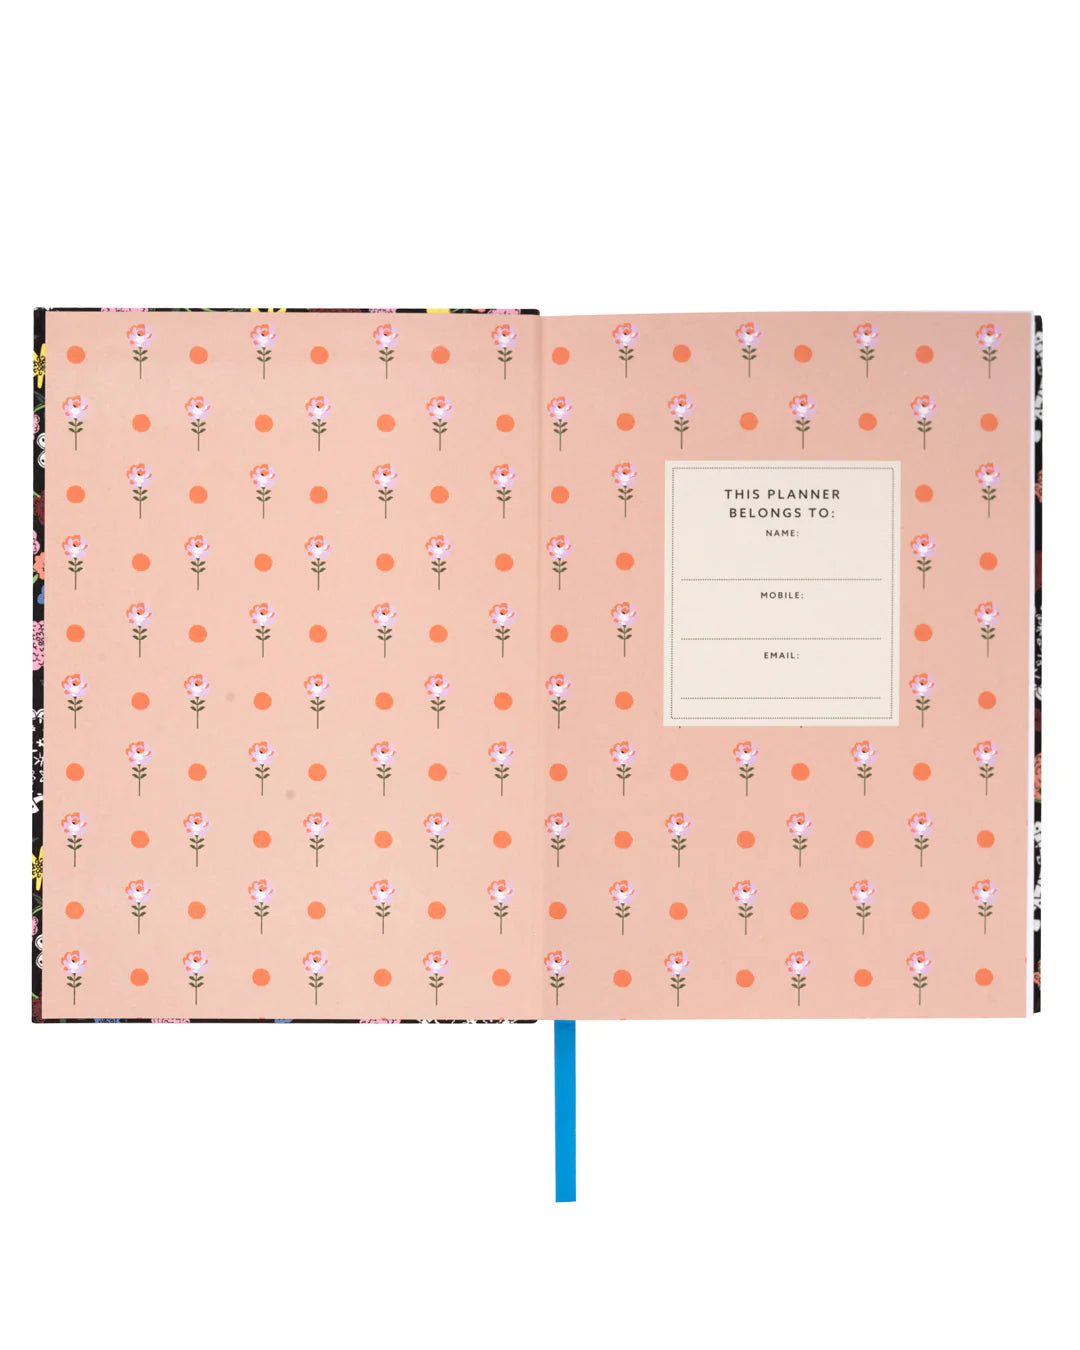 An image showing the first opened page of a planner. The main colour is light pink with geometrically placed peach spots and small flowers. The second page includes a boiler plate to include the owners name, mobile and email. A royal blue page marker ribbon is shown.